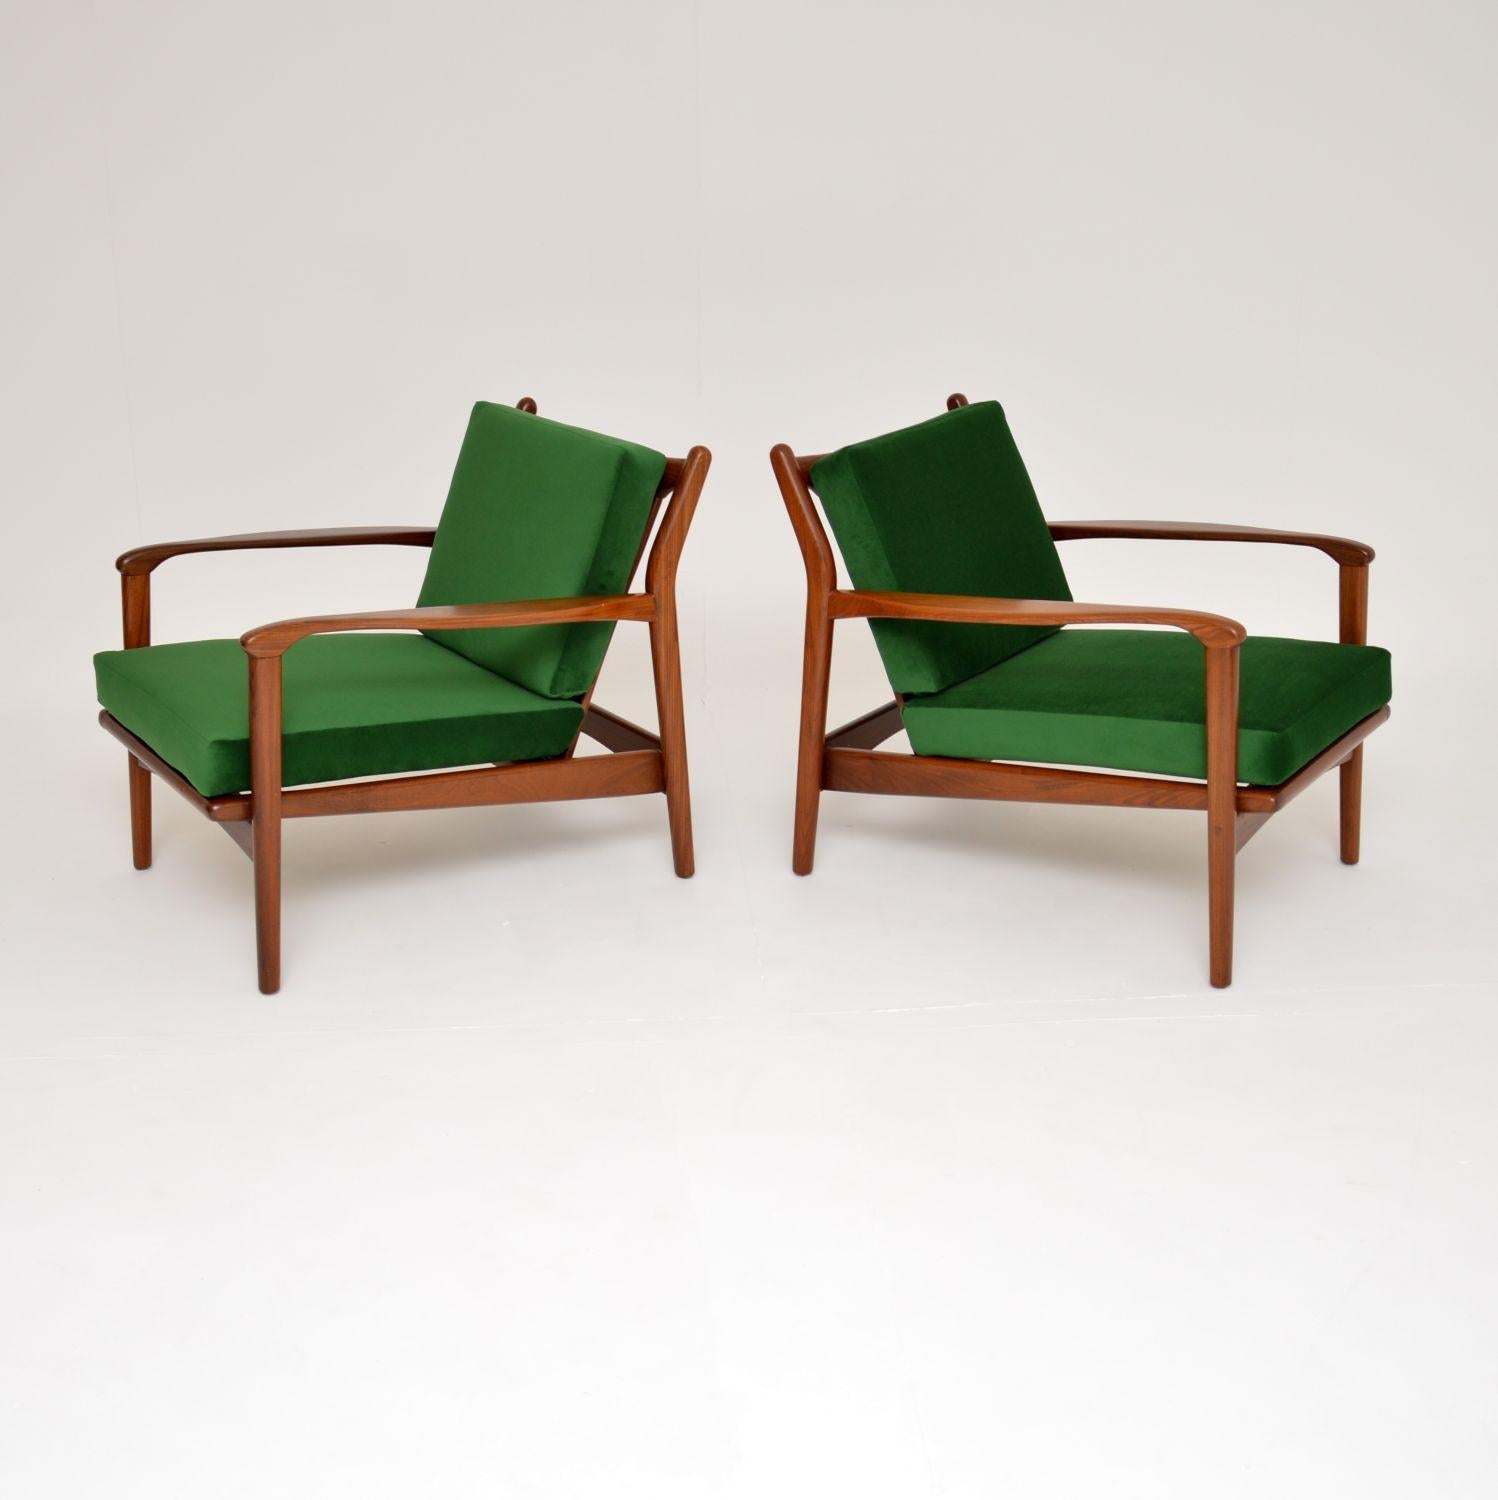 A very stylish, comfortable and extremely well made pair of armchairs in solid afromosia wood. These were made by Toothill furniture in England, they date from the 1960’s.

They are of amazing quality with a beautiful design, these were originally